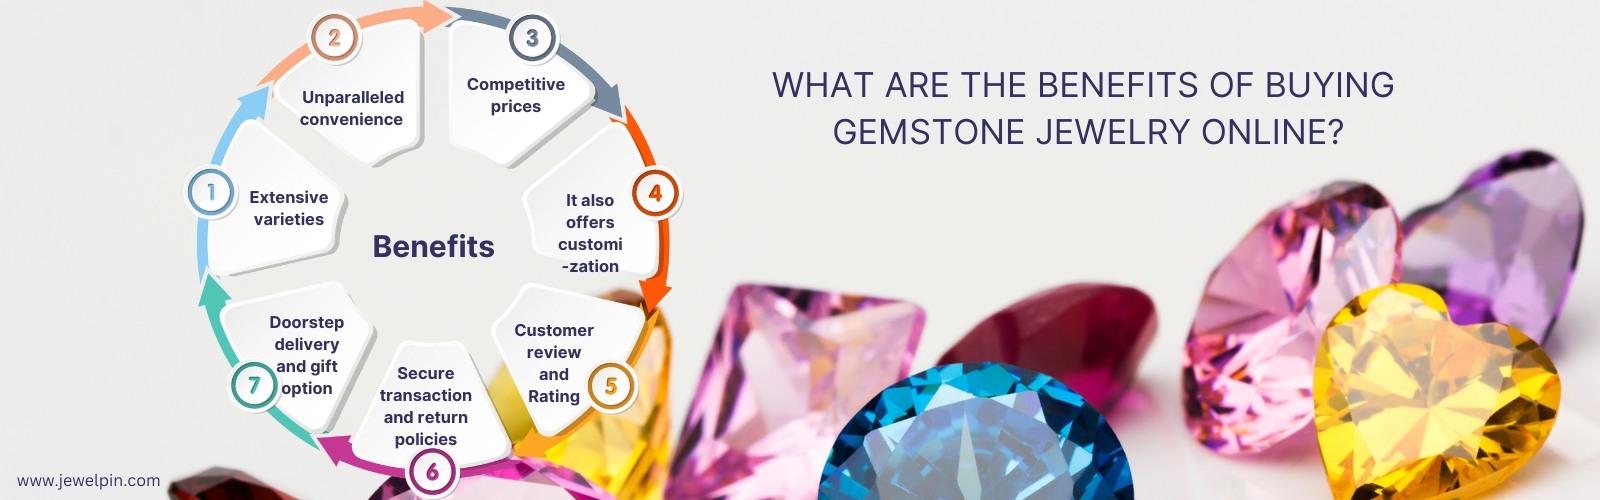 What are the benefits of buying Gemstone jewelry online - Jewepin